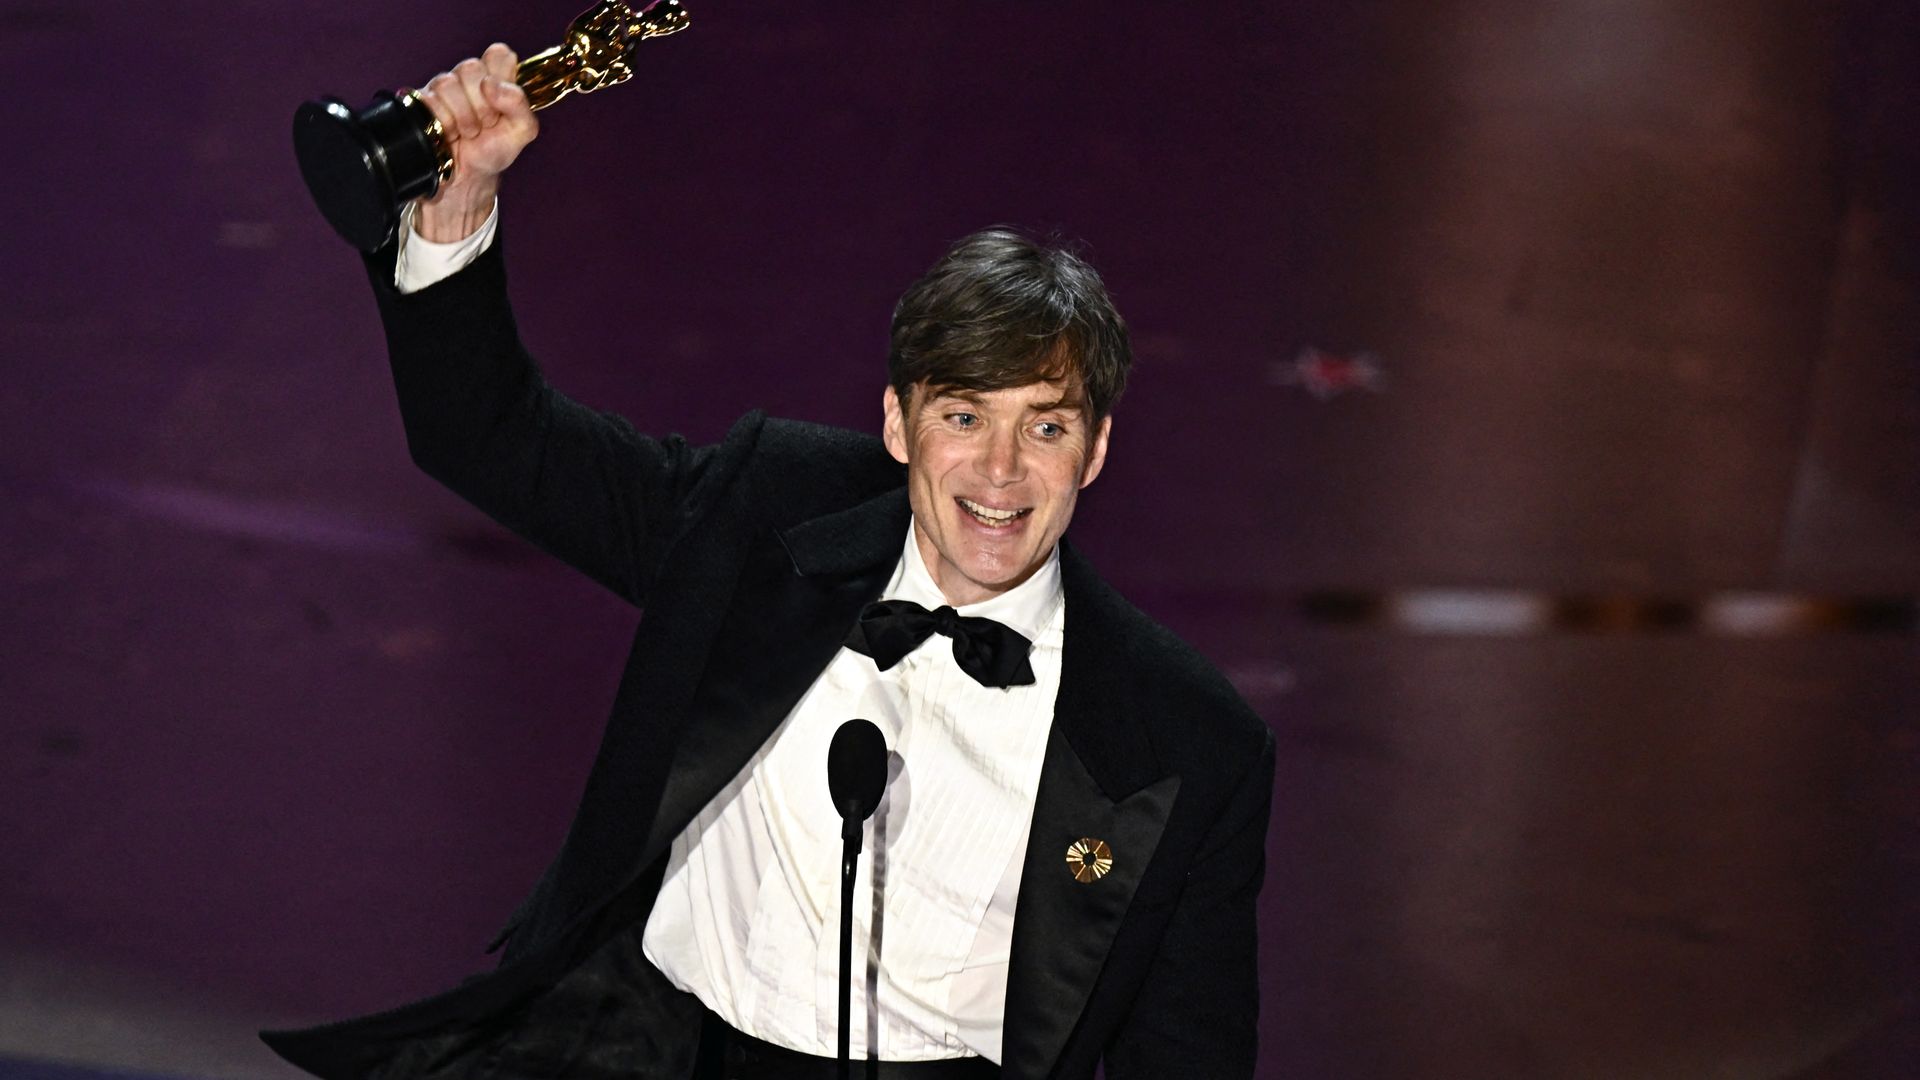 The Irish actor accepts the award for Best Actor in a Leading Role for Oppenheimer at the Oscars